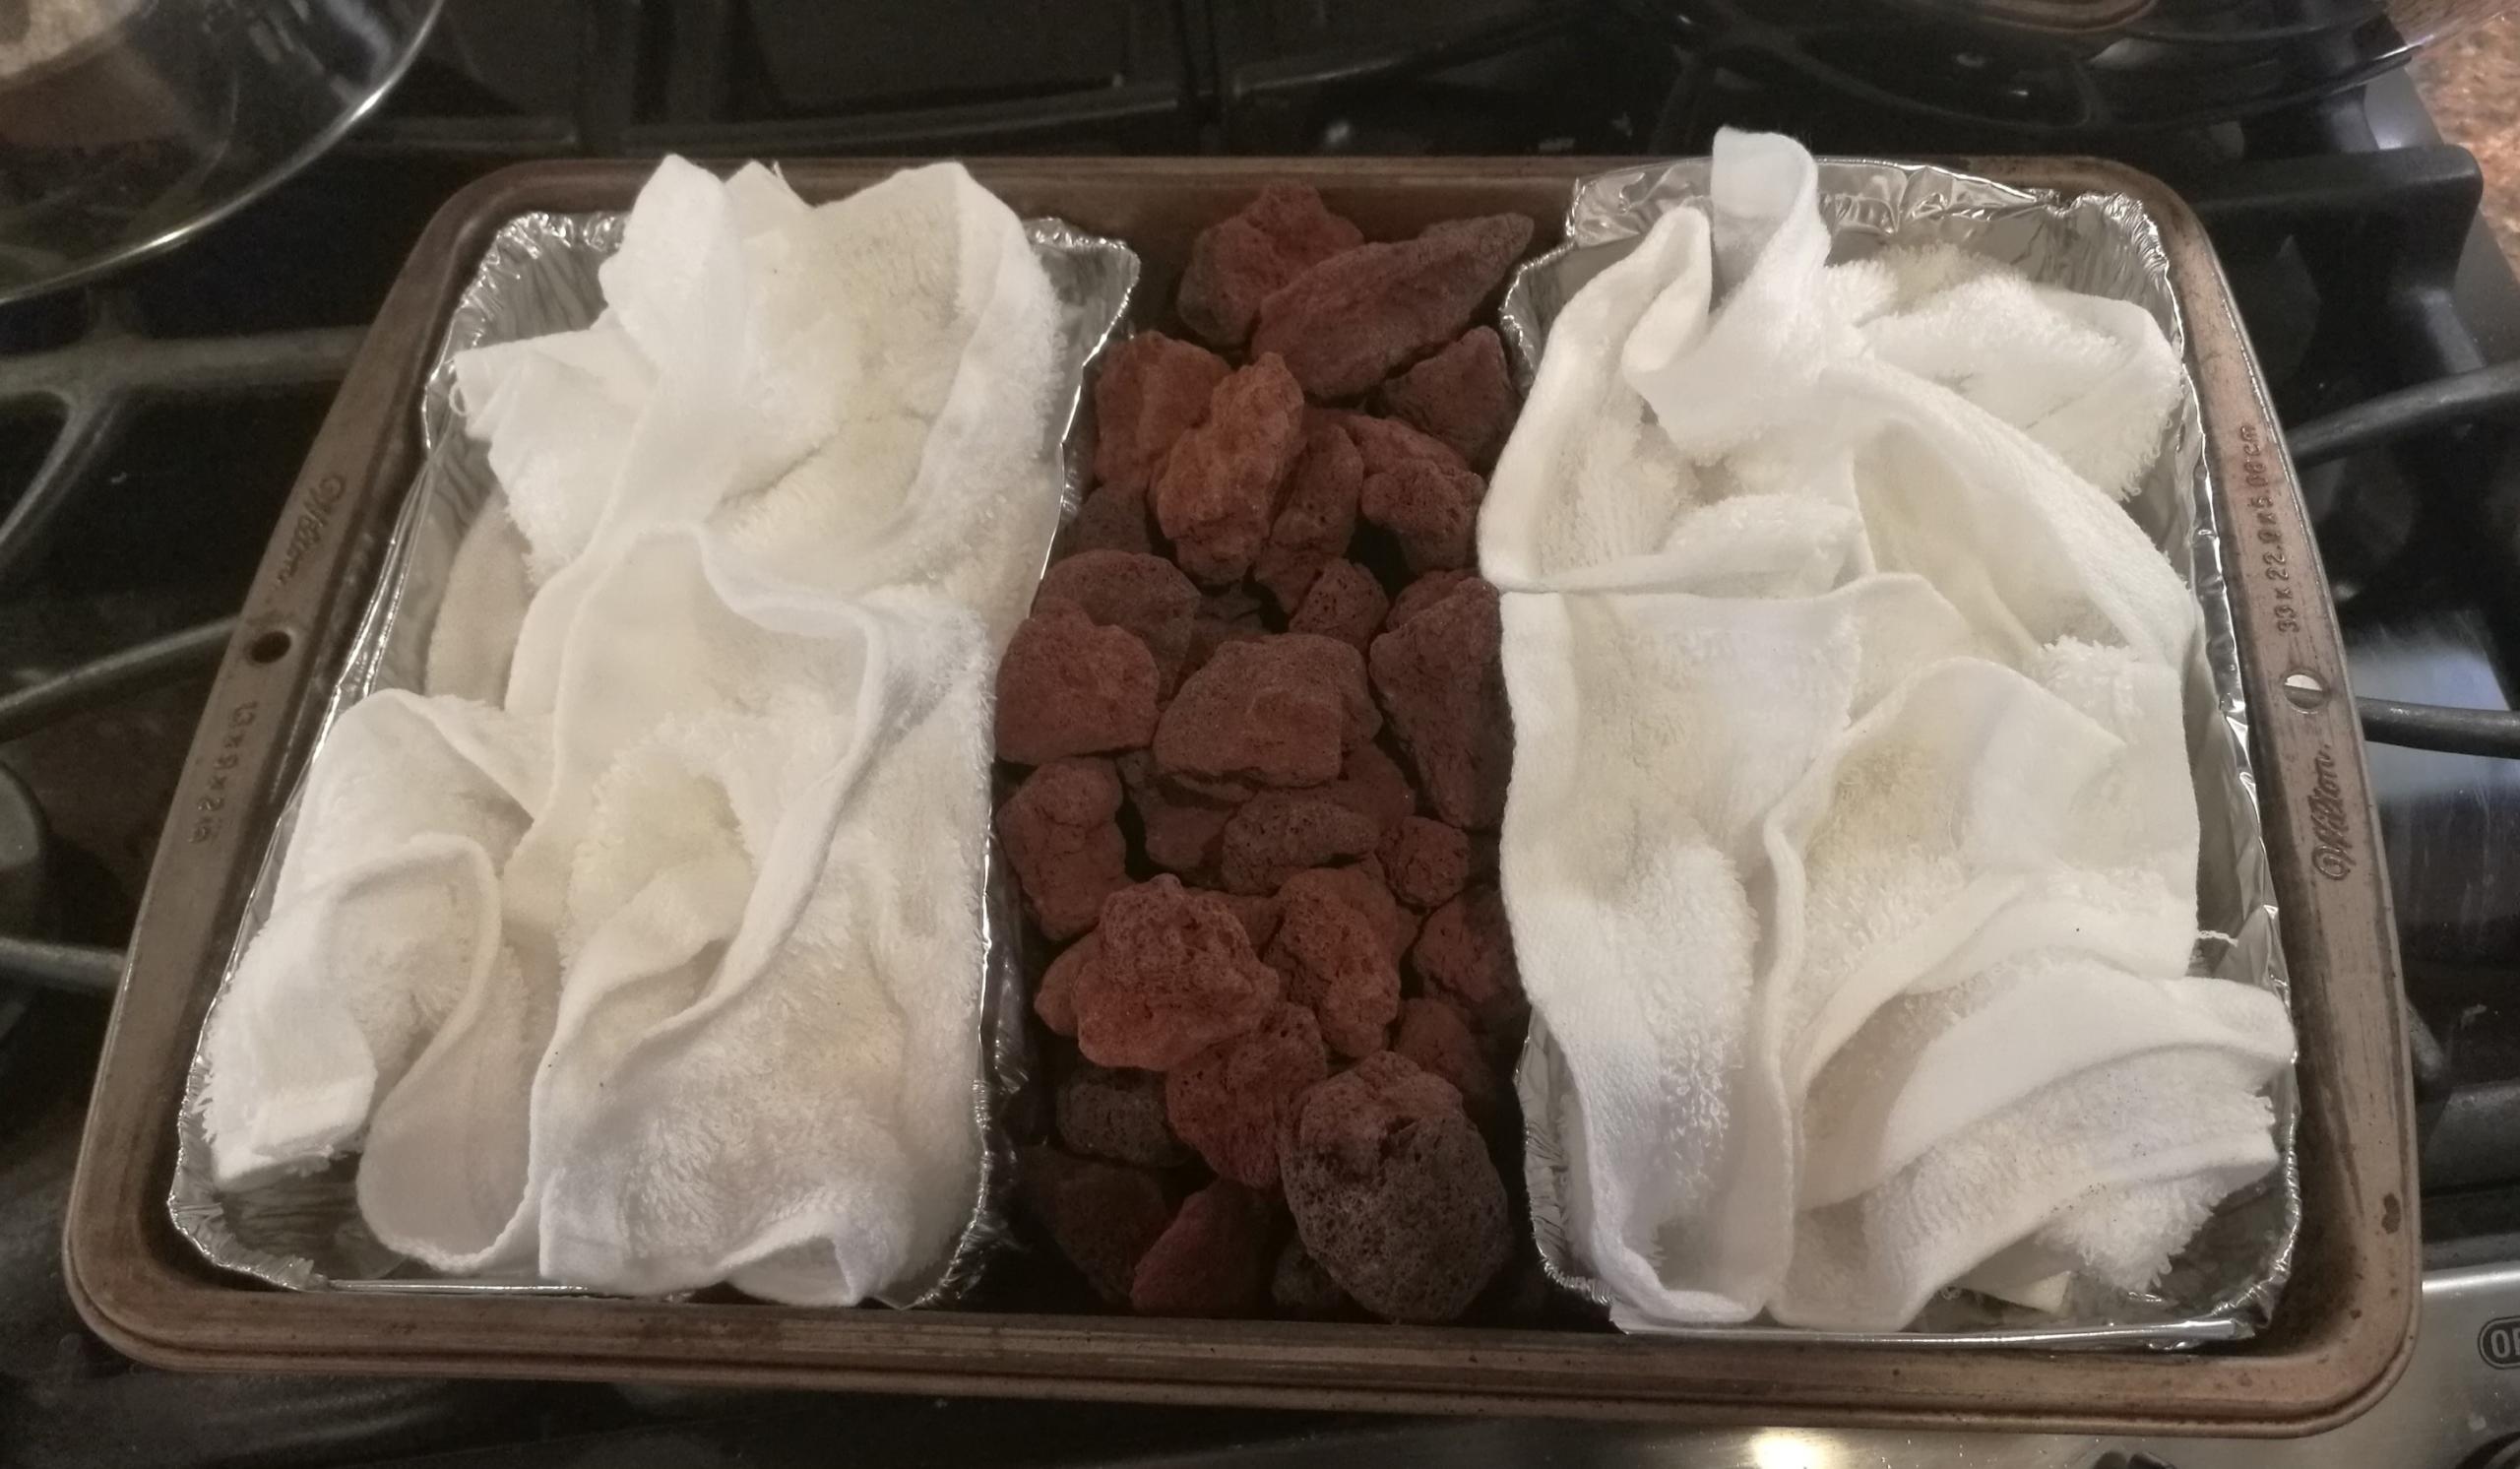 Hot towels? Hot lava rock, anyone? All in one hot steaming package... 